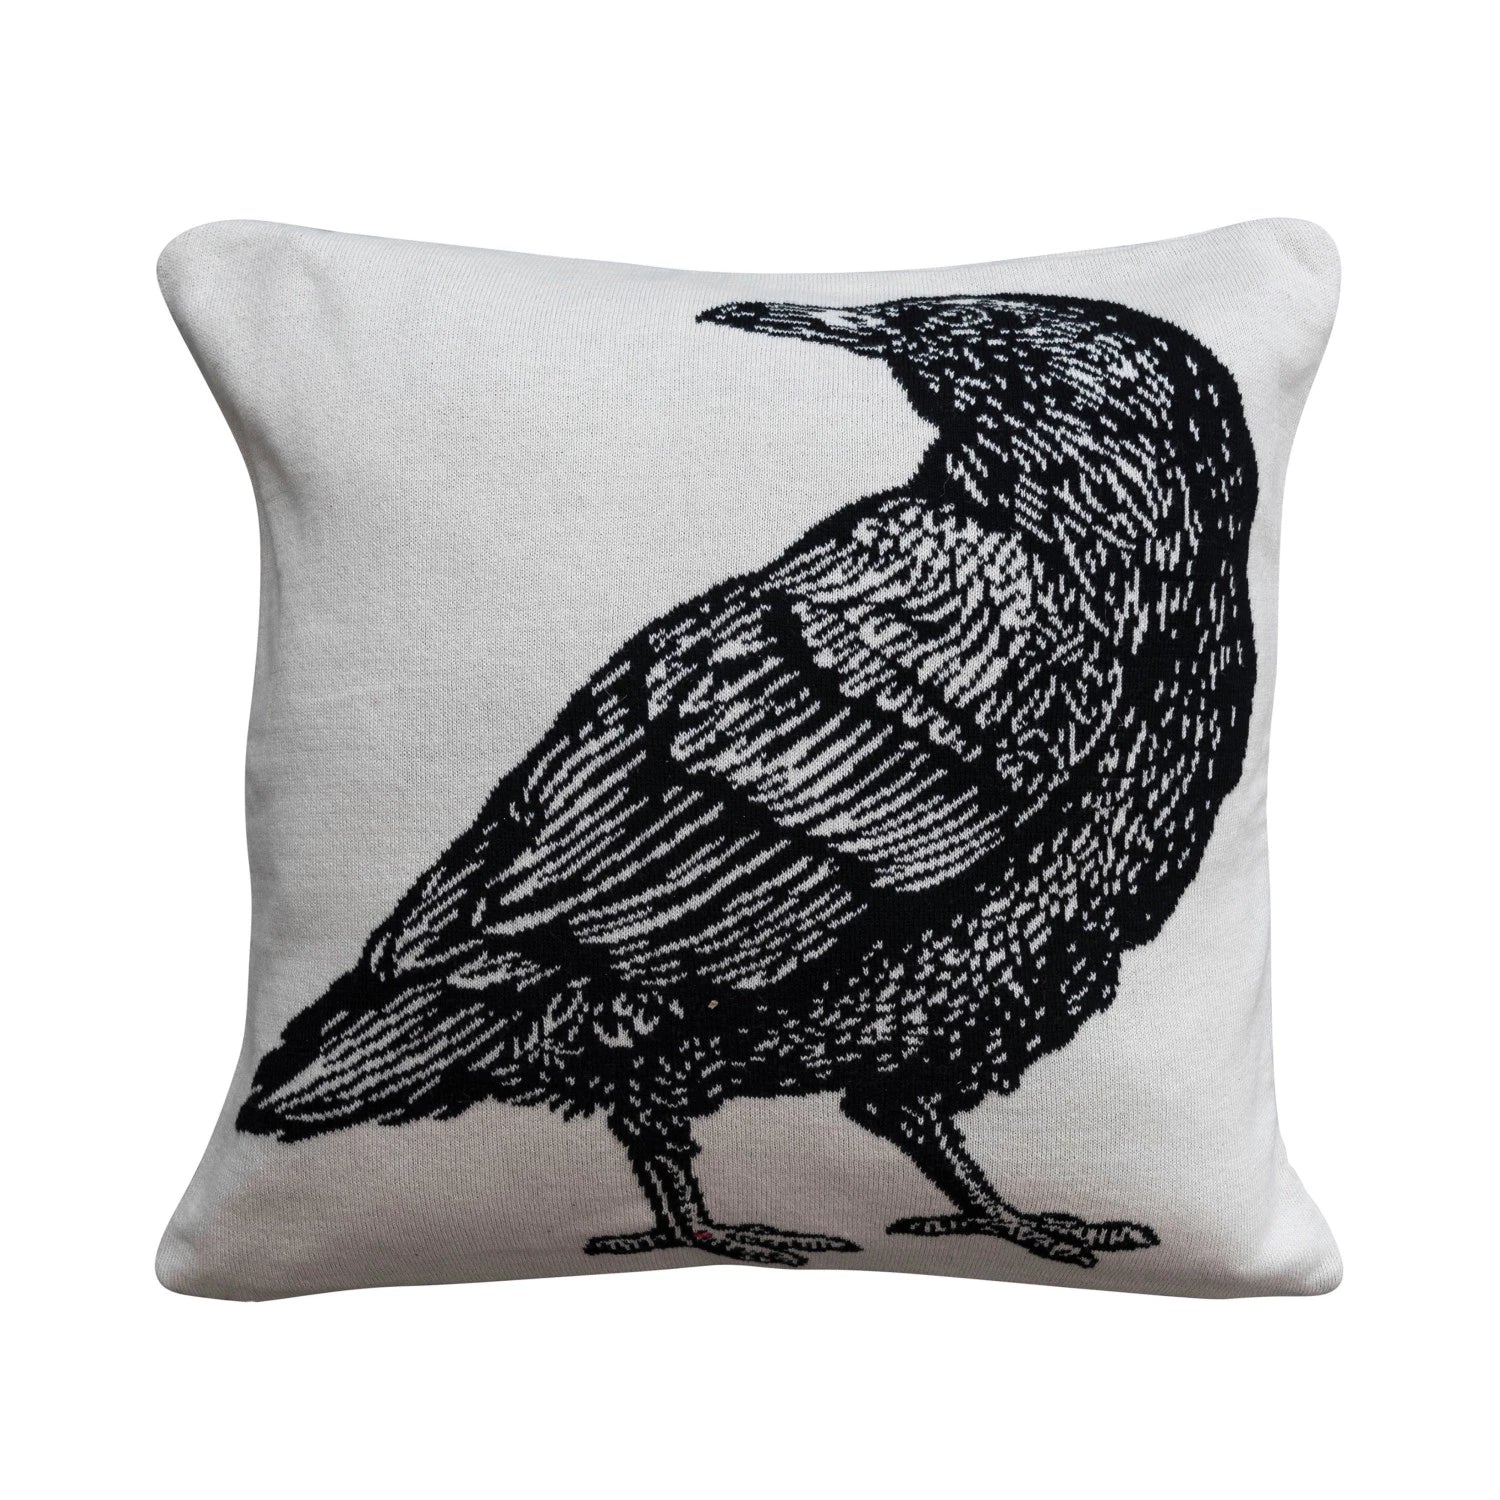 18" Square Two-Sided Cotton Knit Pillow w/ Crow, White & Black